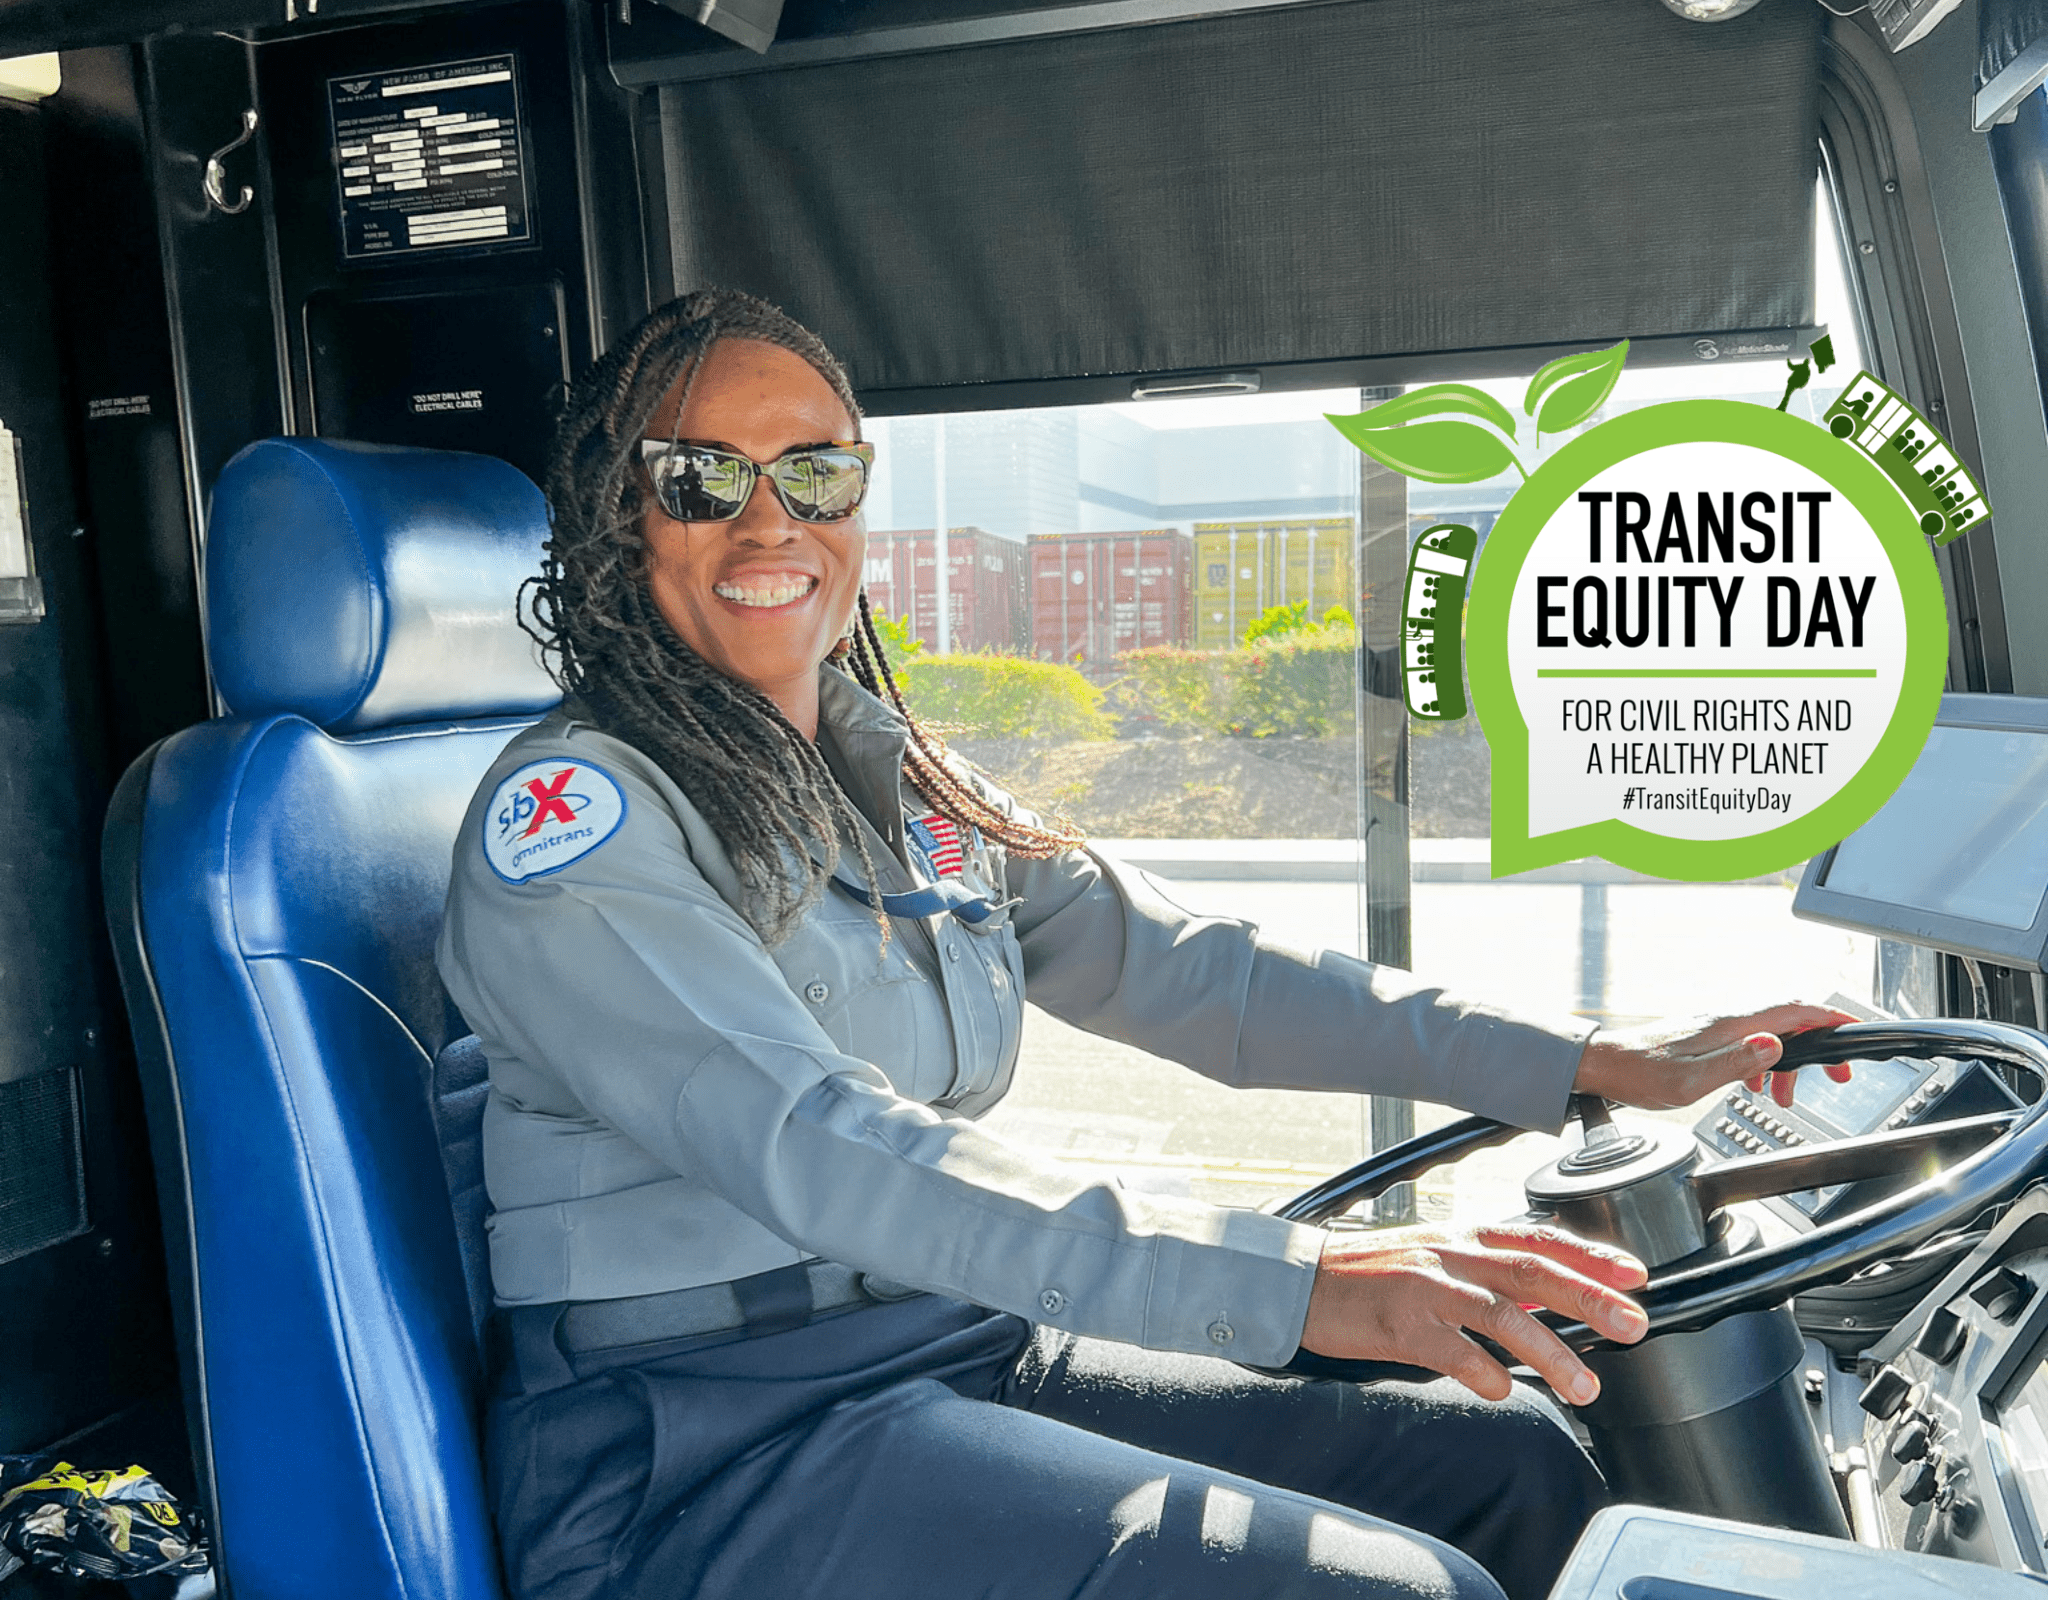 Transit Equity Day – FREE rides on fixed-route services!